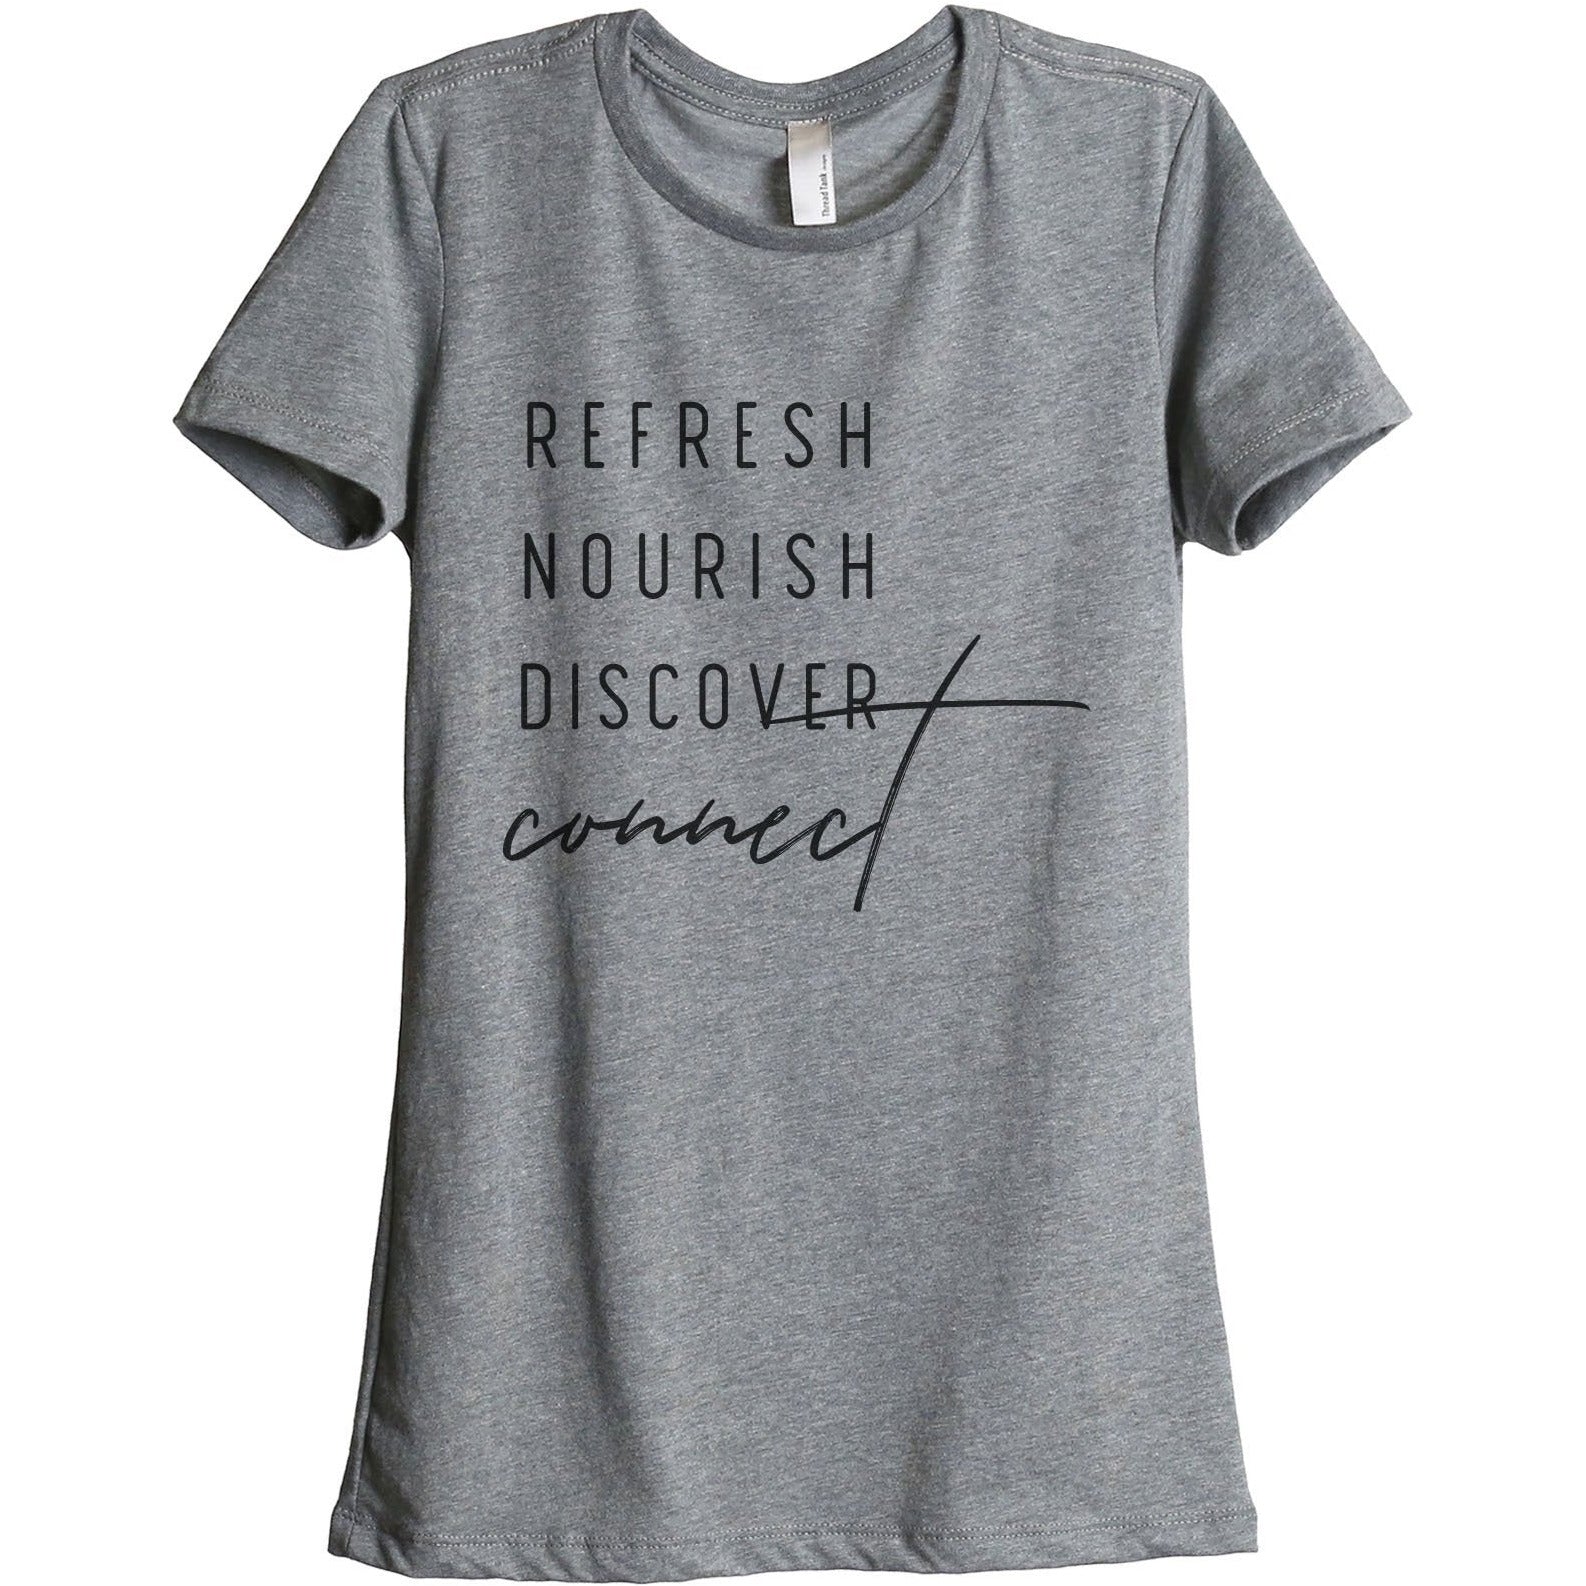 Refresh Nourish Discover Connect